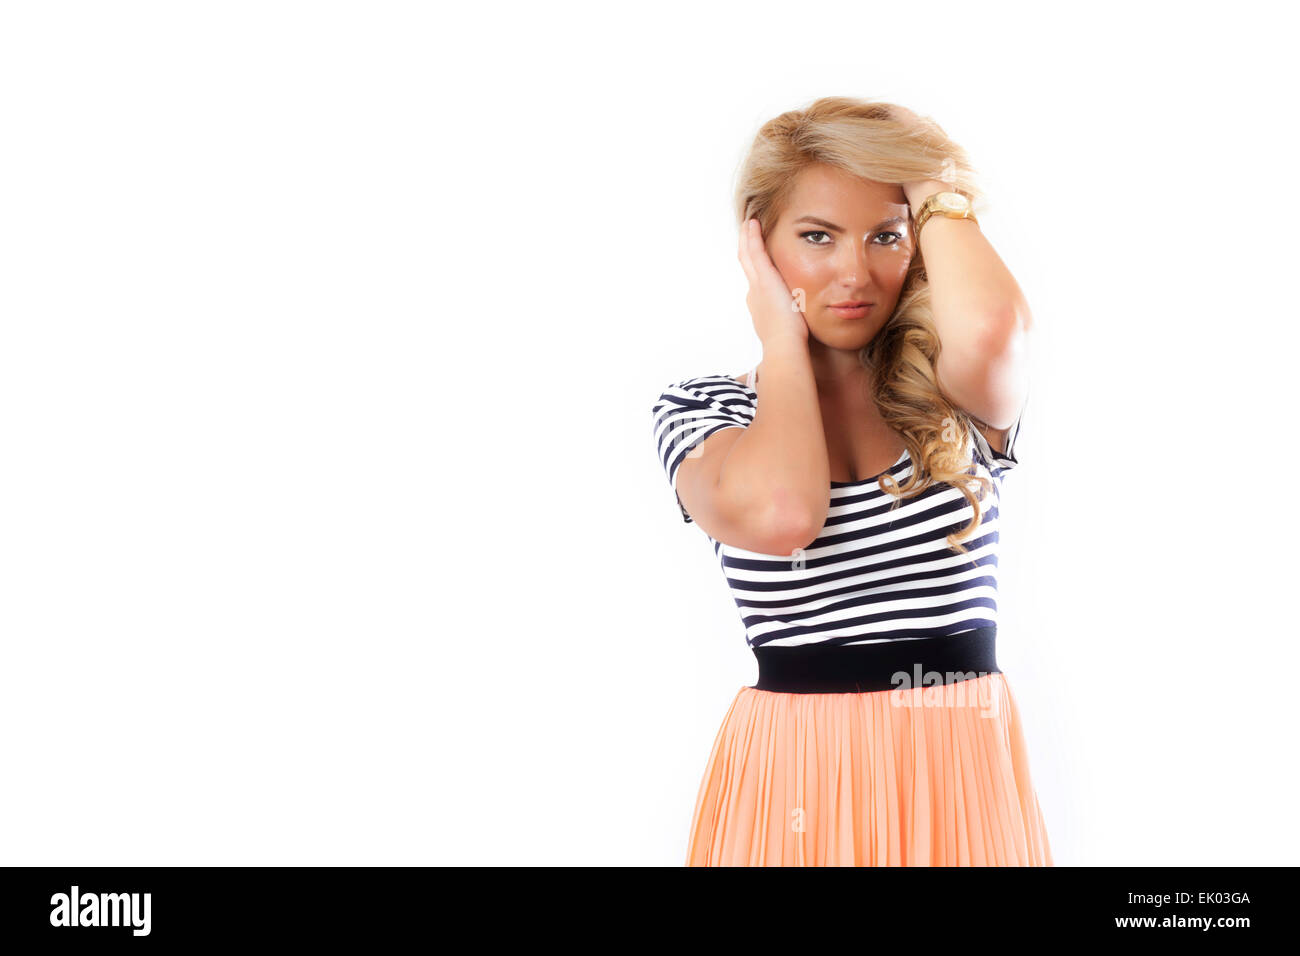 A blonde Latina girl in a black and white top and orange skirt and gold watch. Isolated on white background. Stock Photo